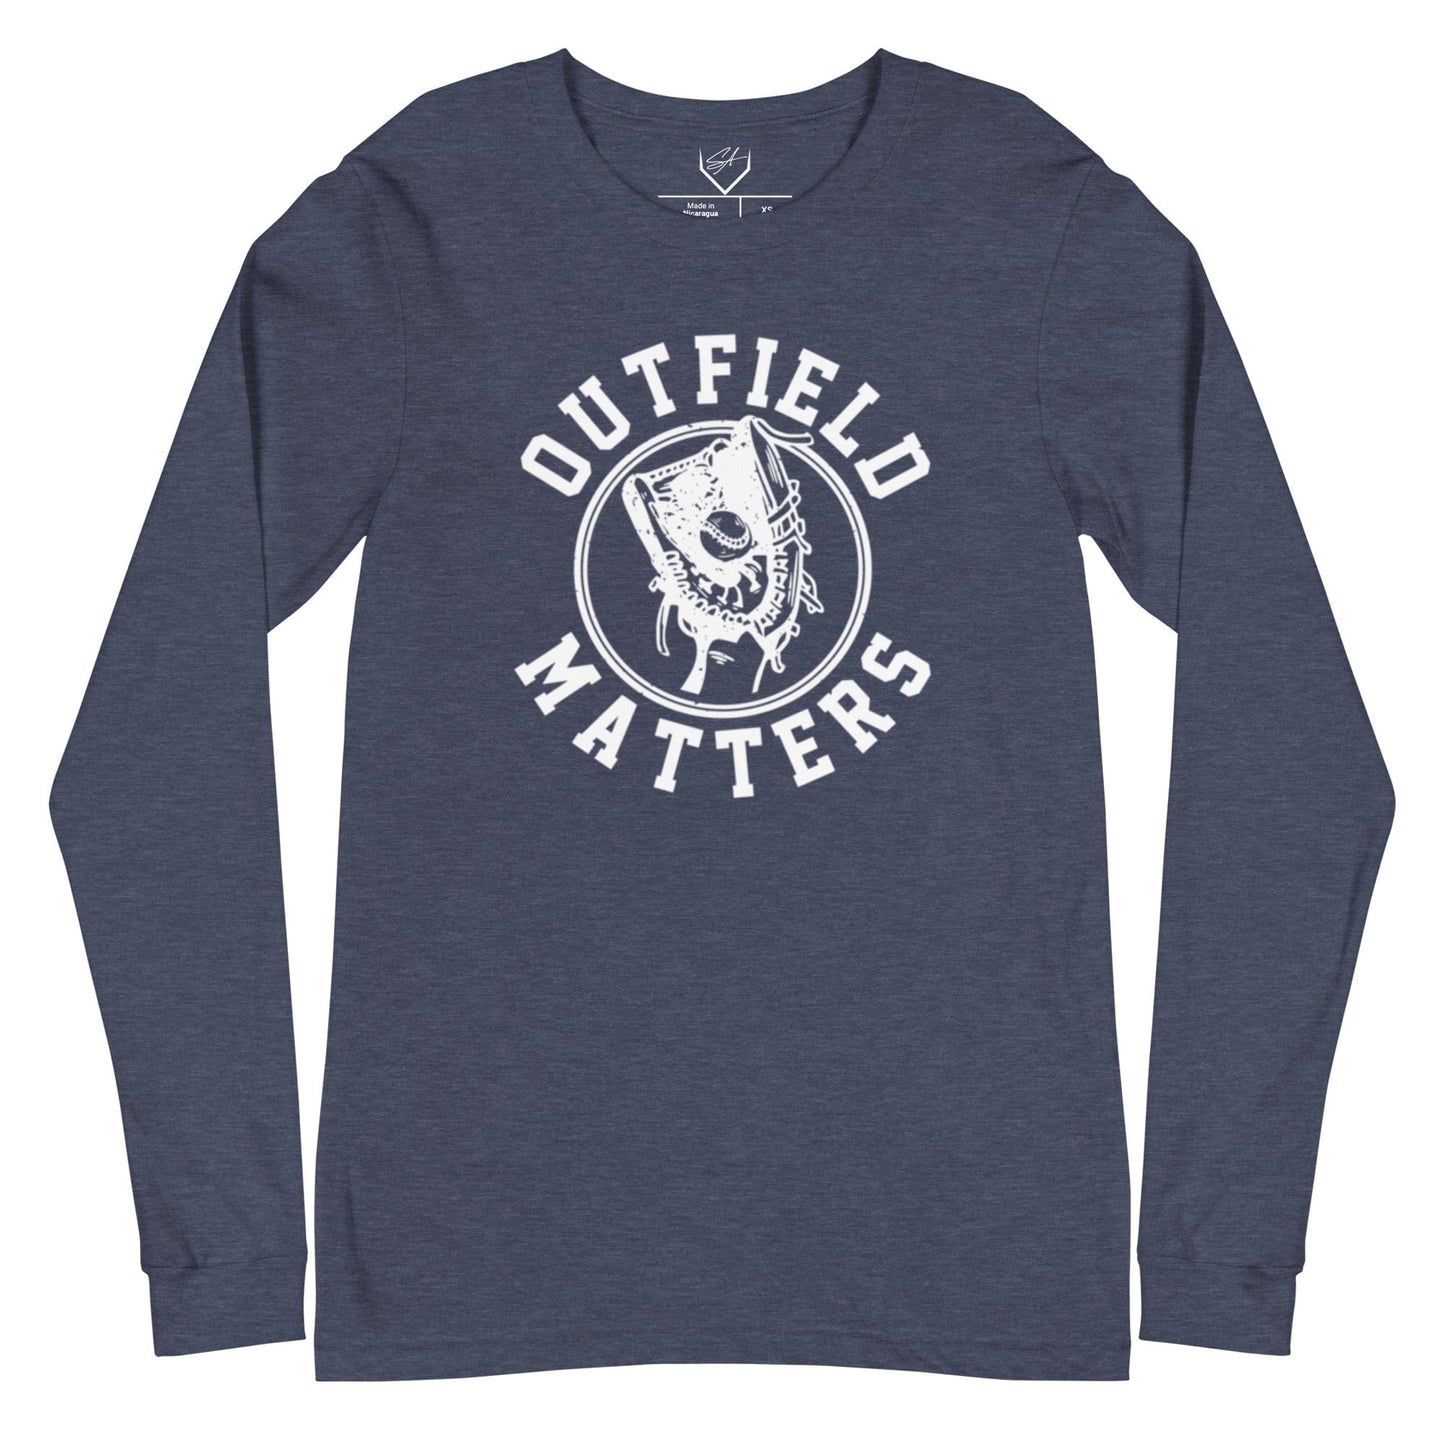 Outfield Matters - Adult Long Sleeve